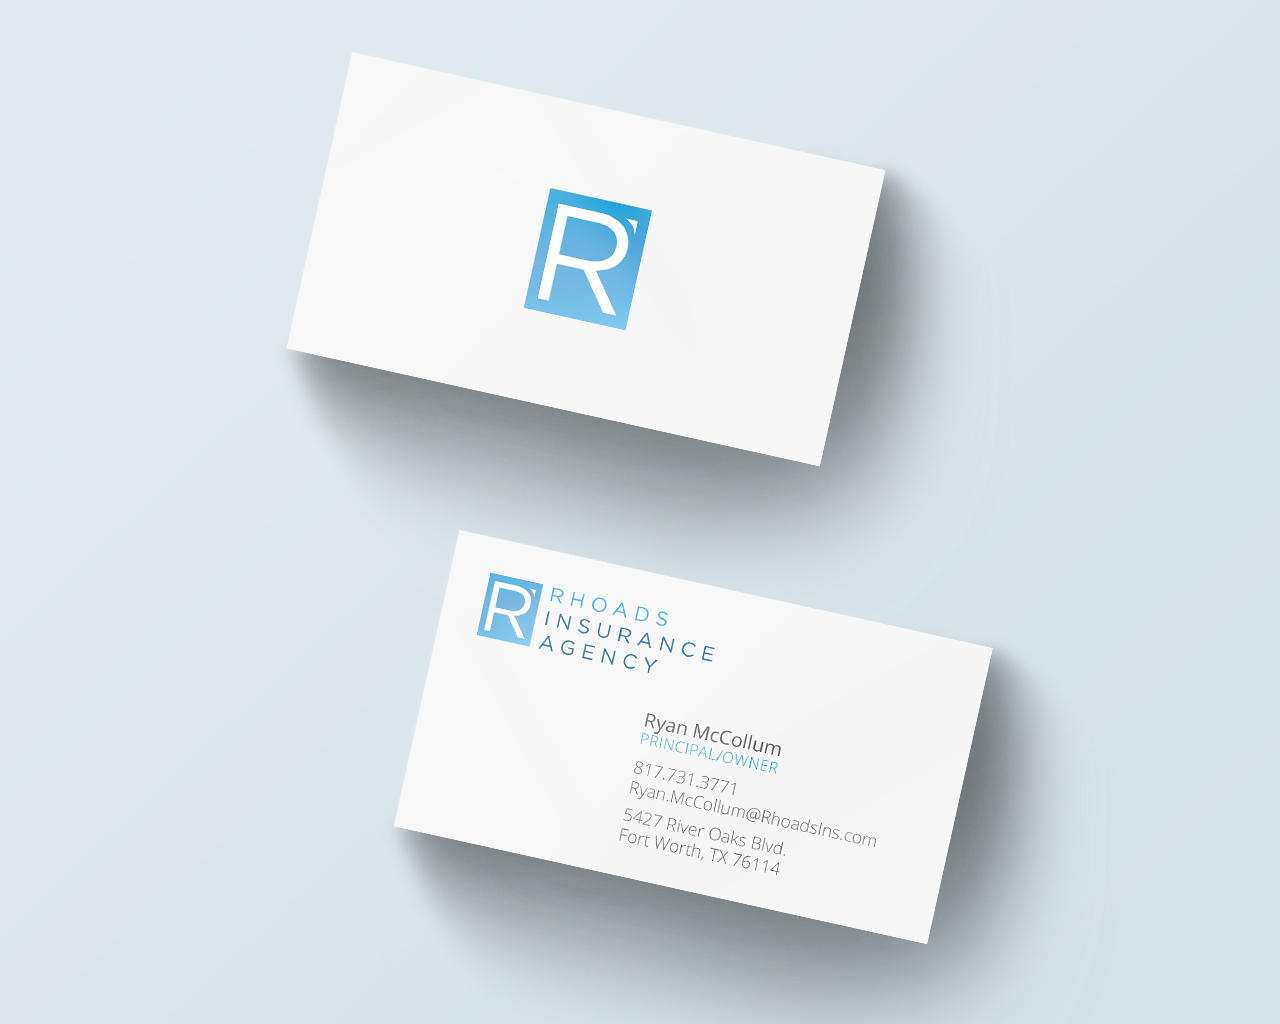 https://www.smartguests.com/images/products_gallery_images/custom_business_cards50.jpg